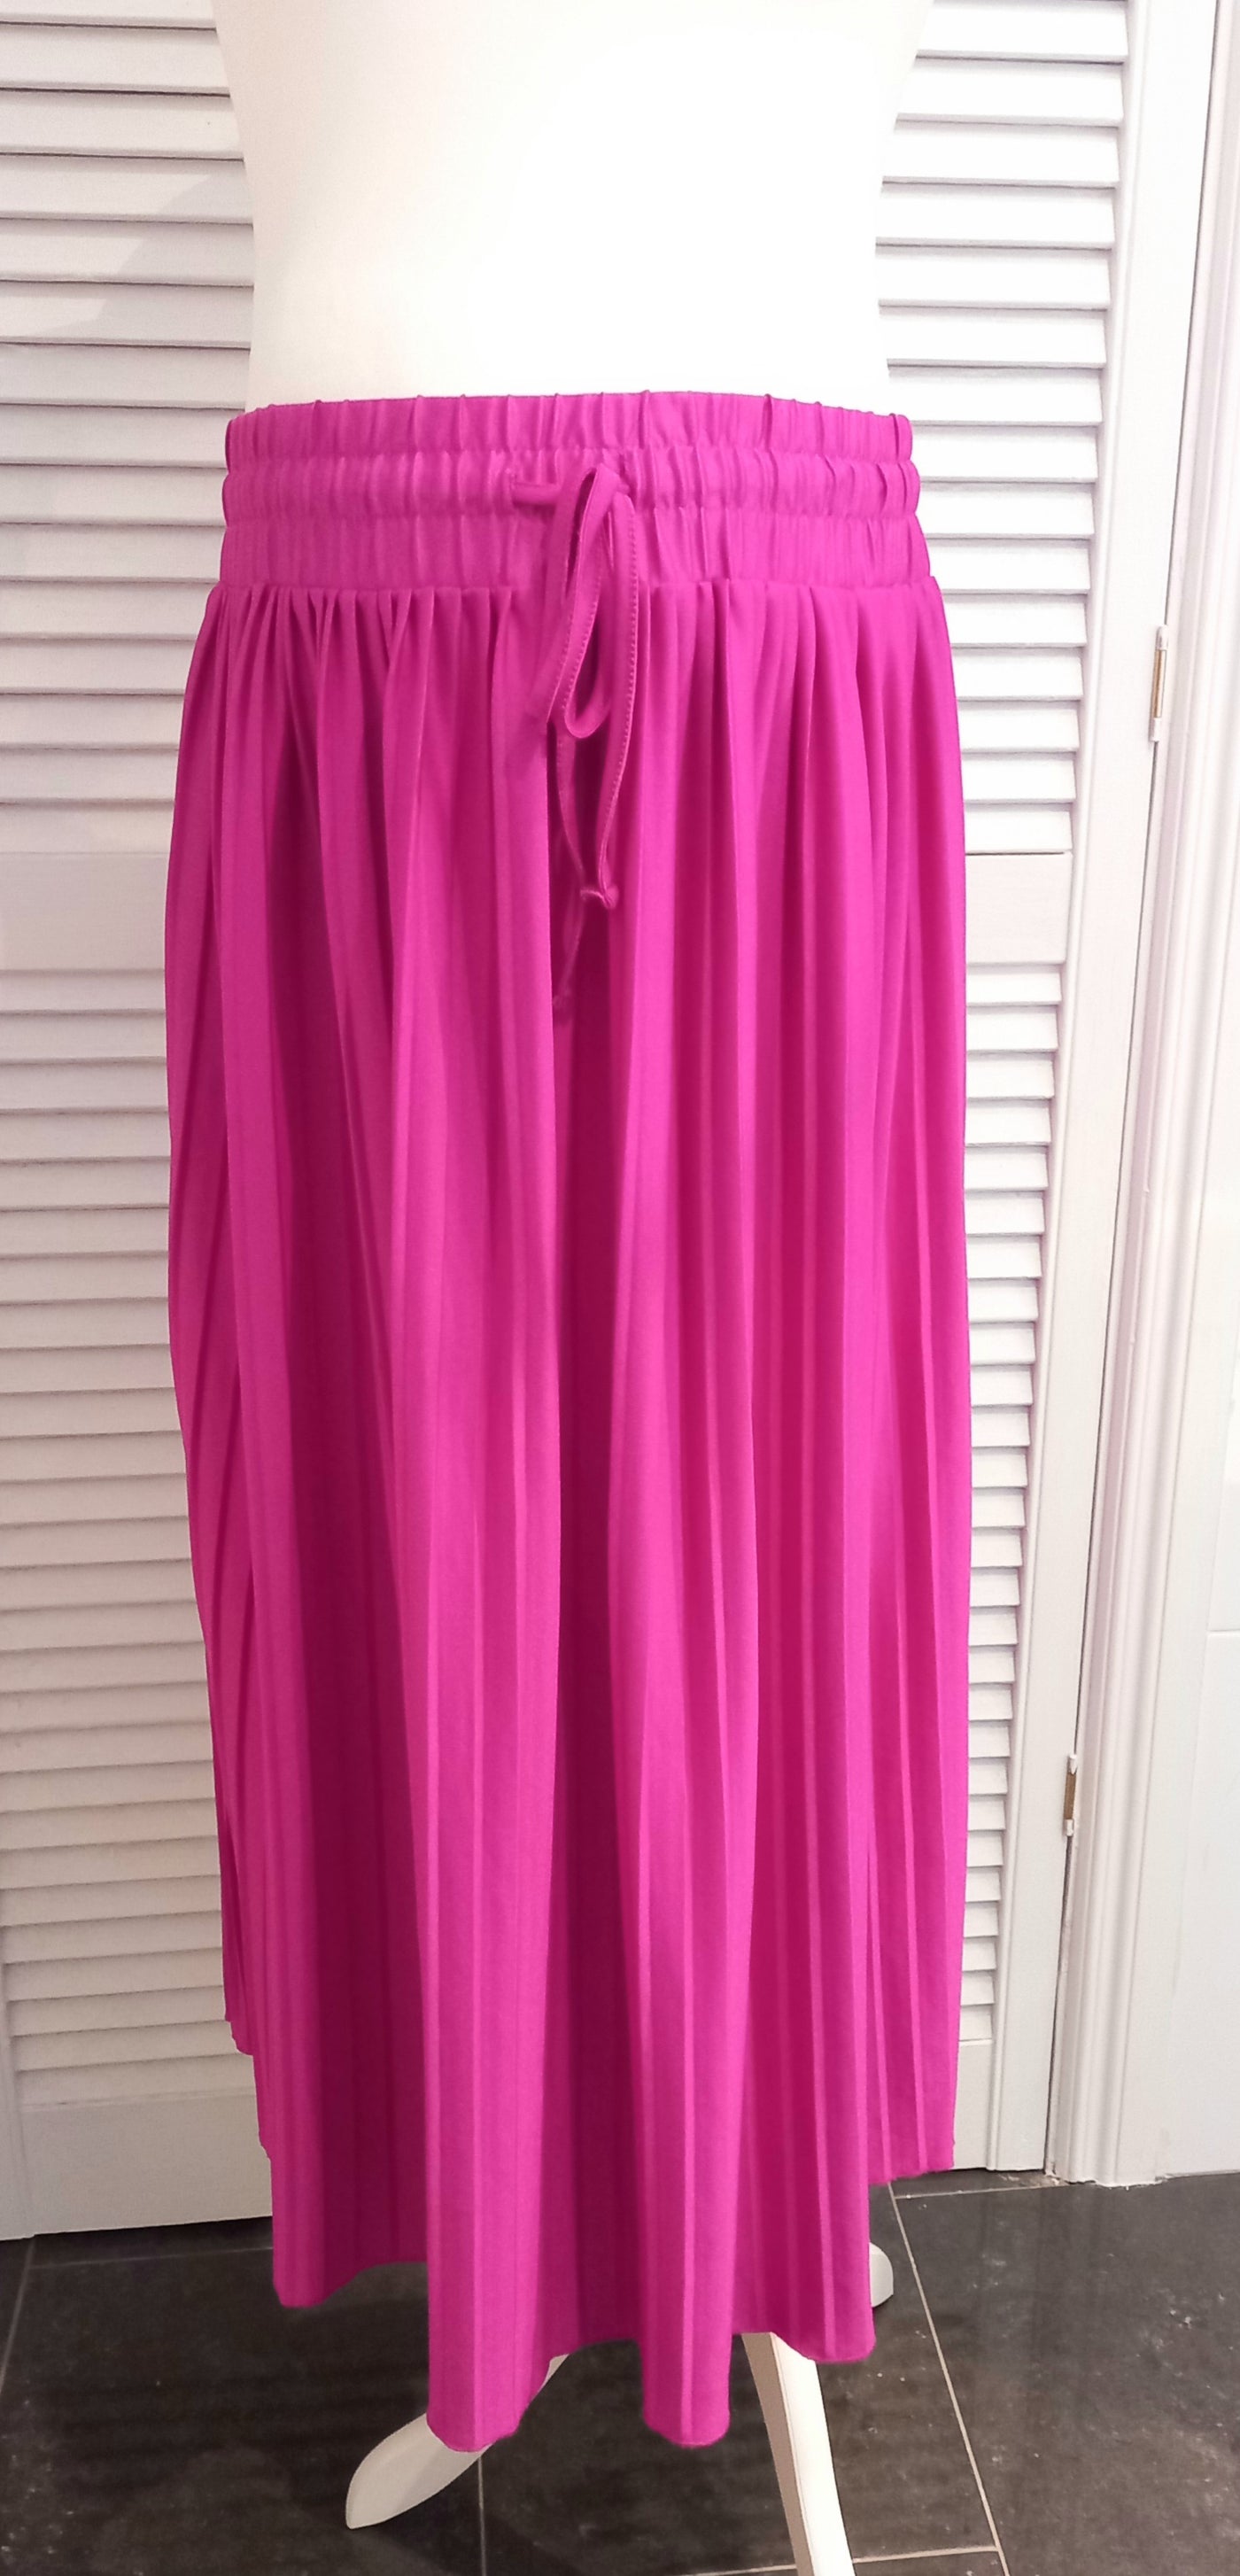 Gallery Fuchsia Pleated Skirt - Size L (Approx. UK 14/16)